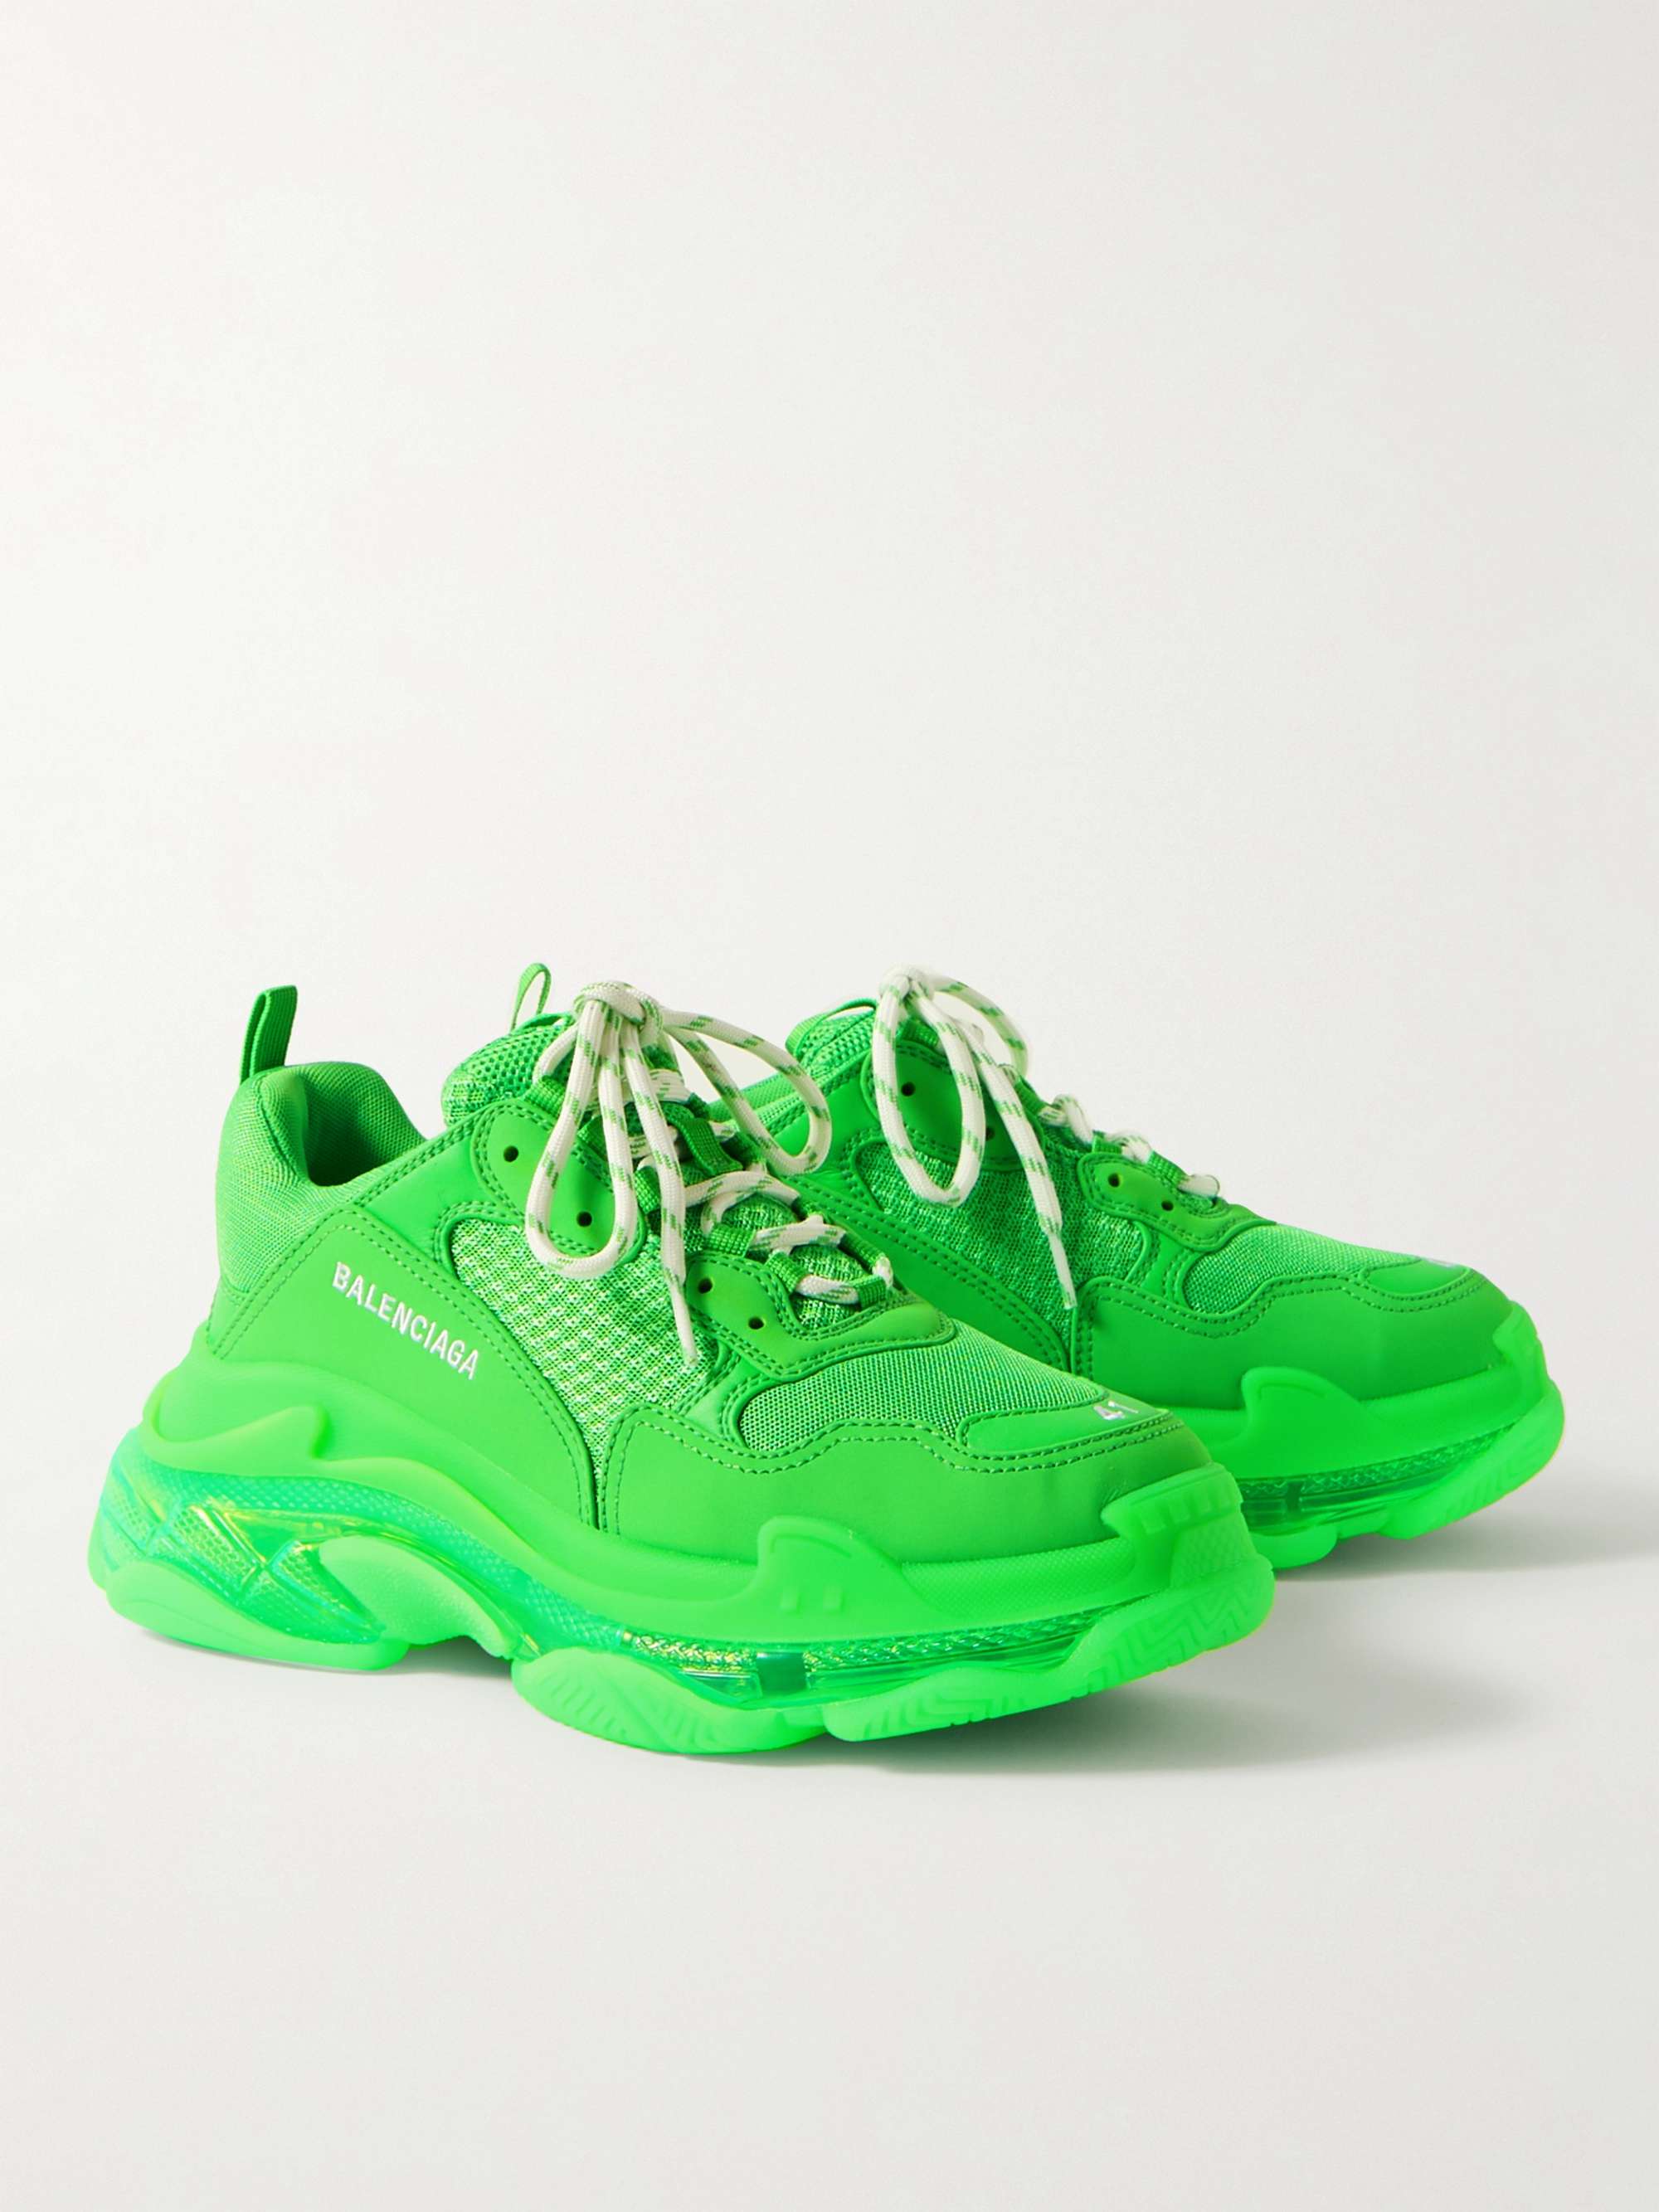 BALENCIAGA Triple S Clear Sole Mesh, Nubuck and Leather Sneakers | MR PORTER